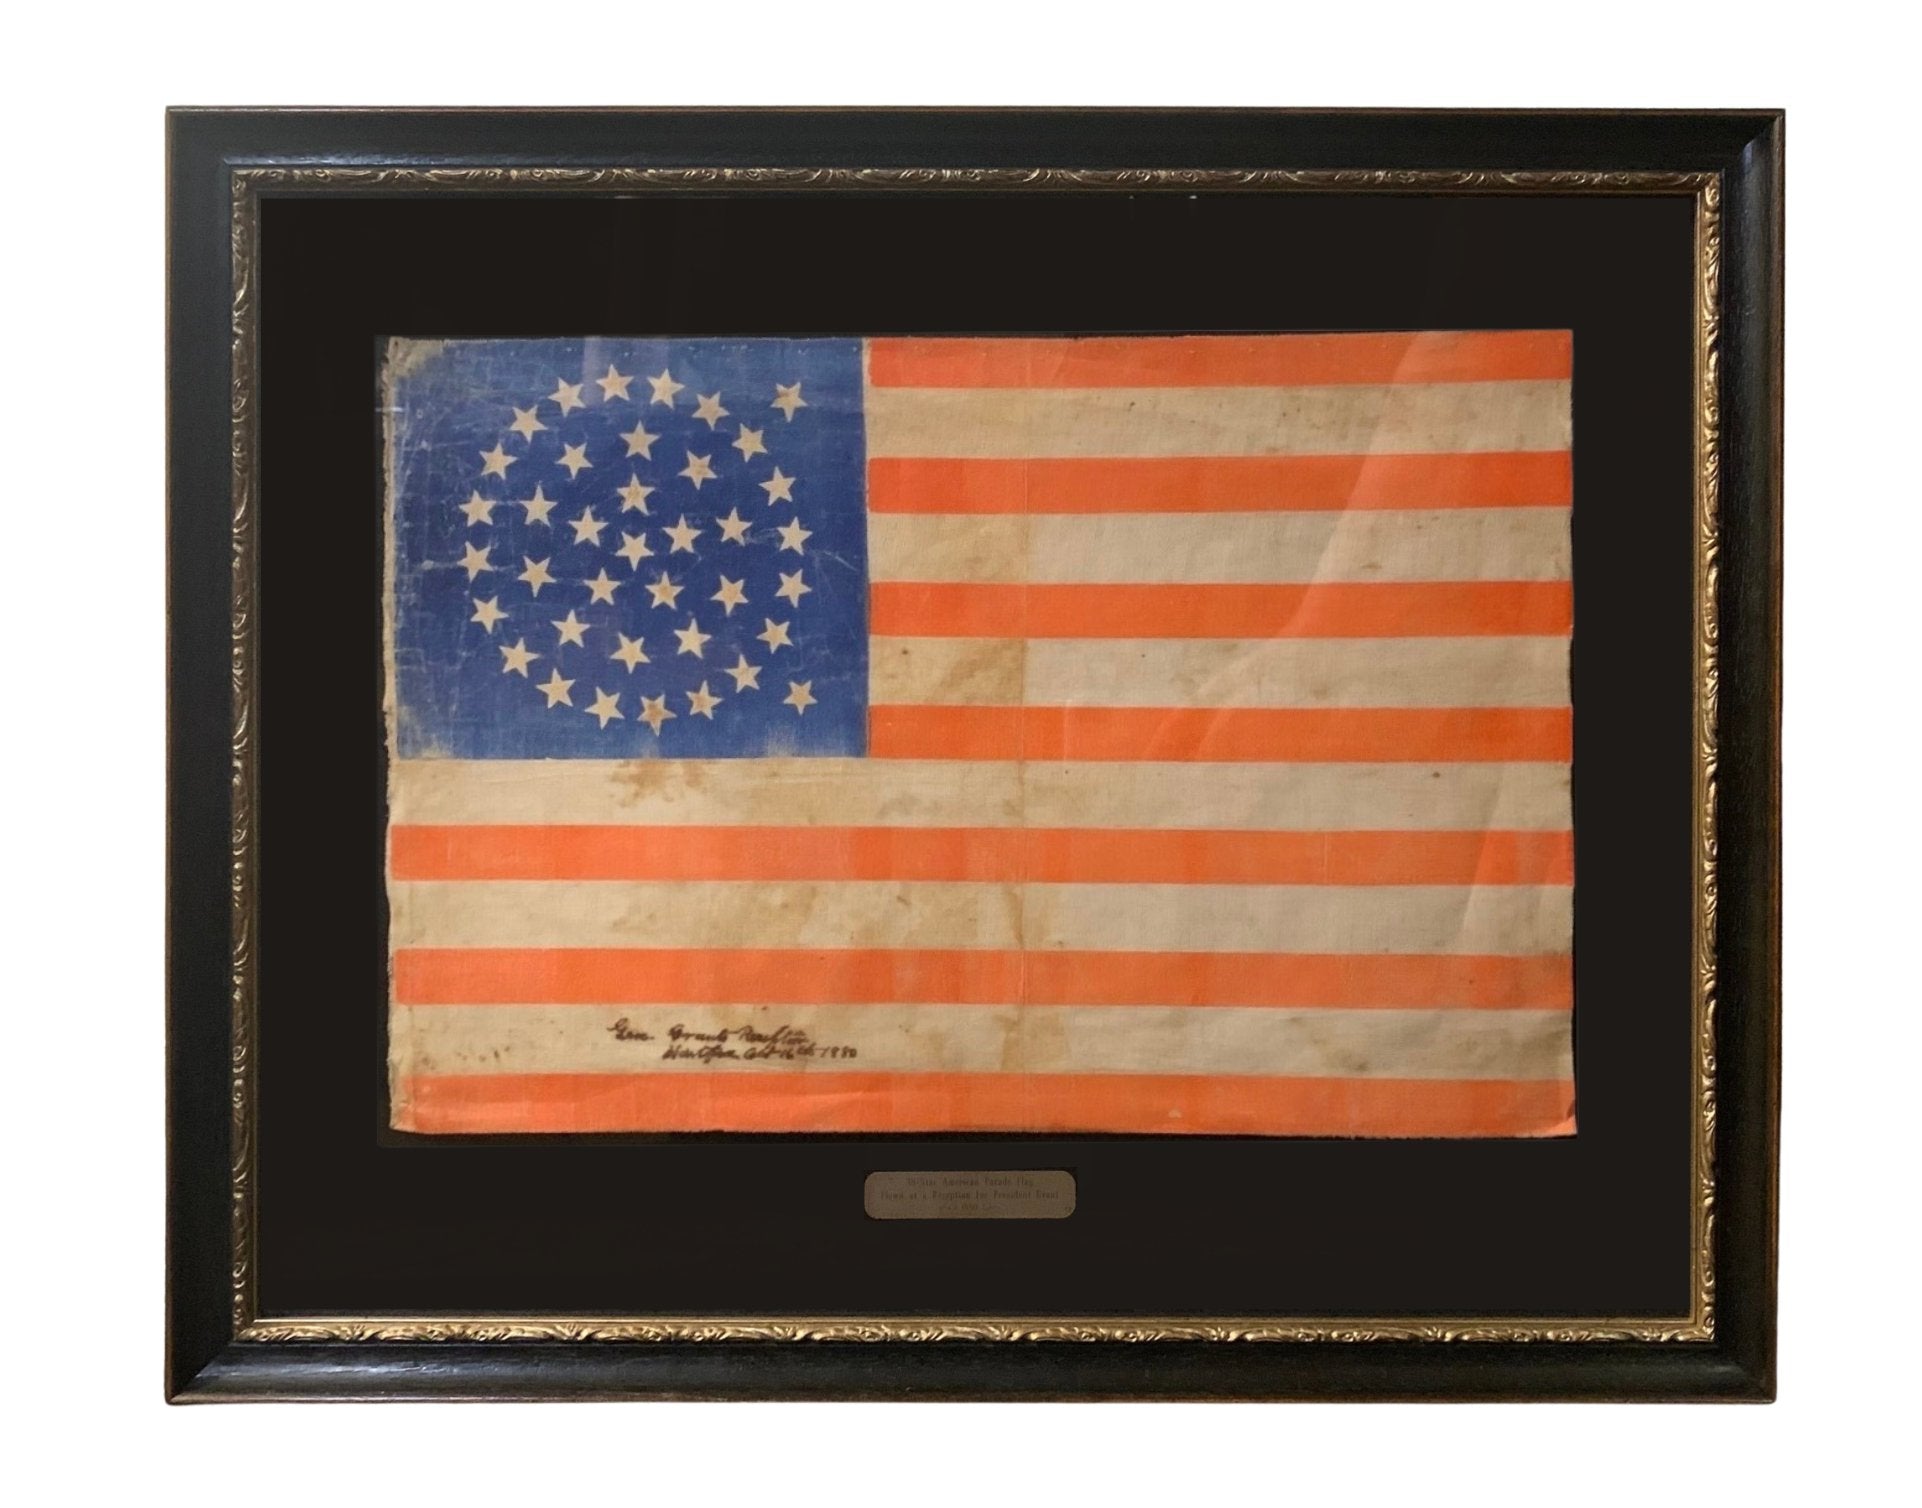 38 - Star American Parade Flag, Flown at a Reception for President Grant, 1880 - The Great Republic